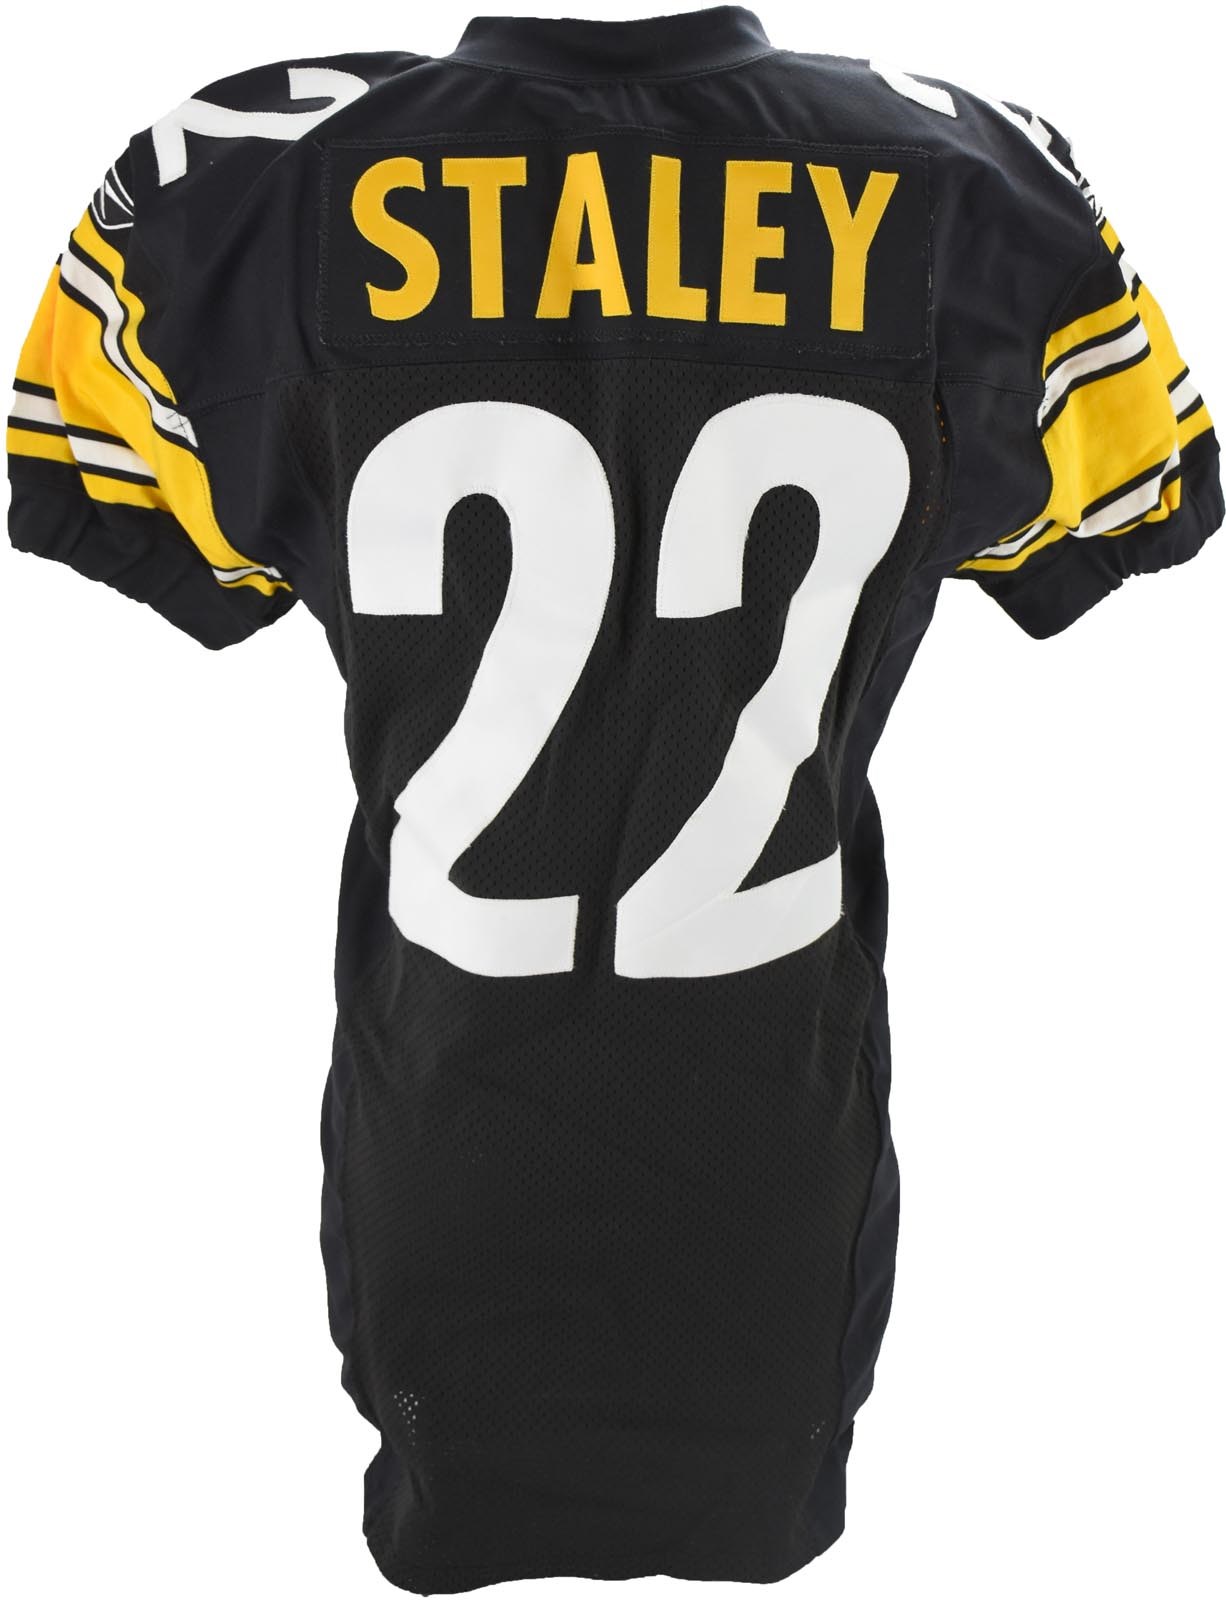 - 2004 Duce Staley Game Worn Steelers Jersey